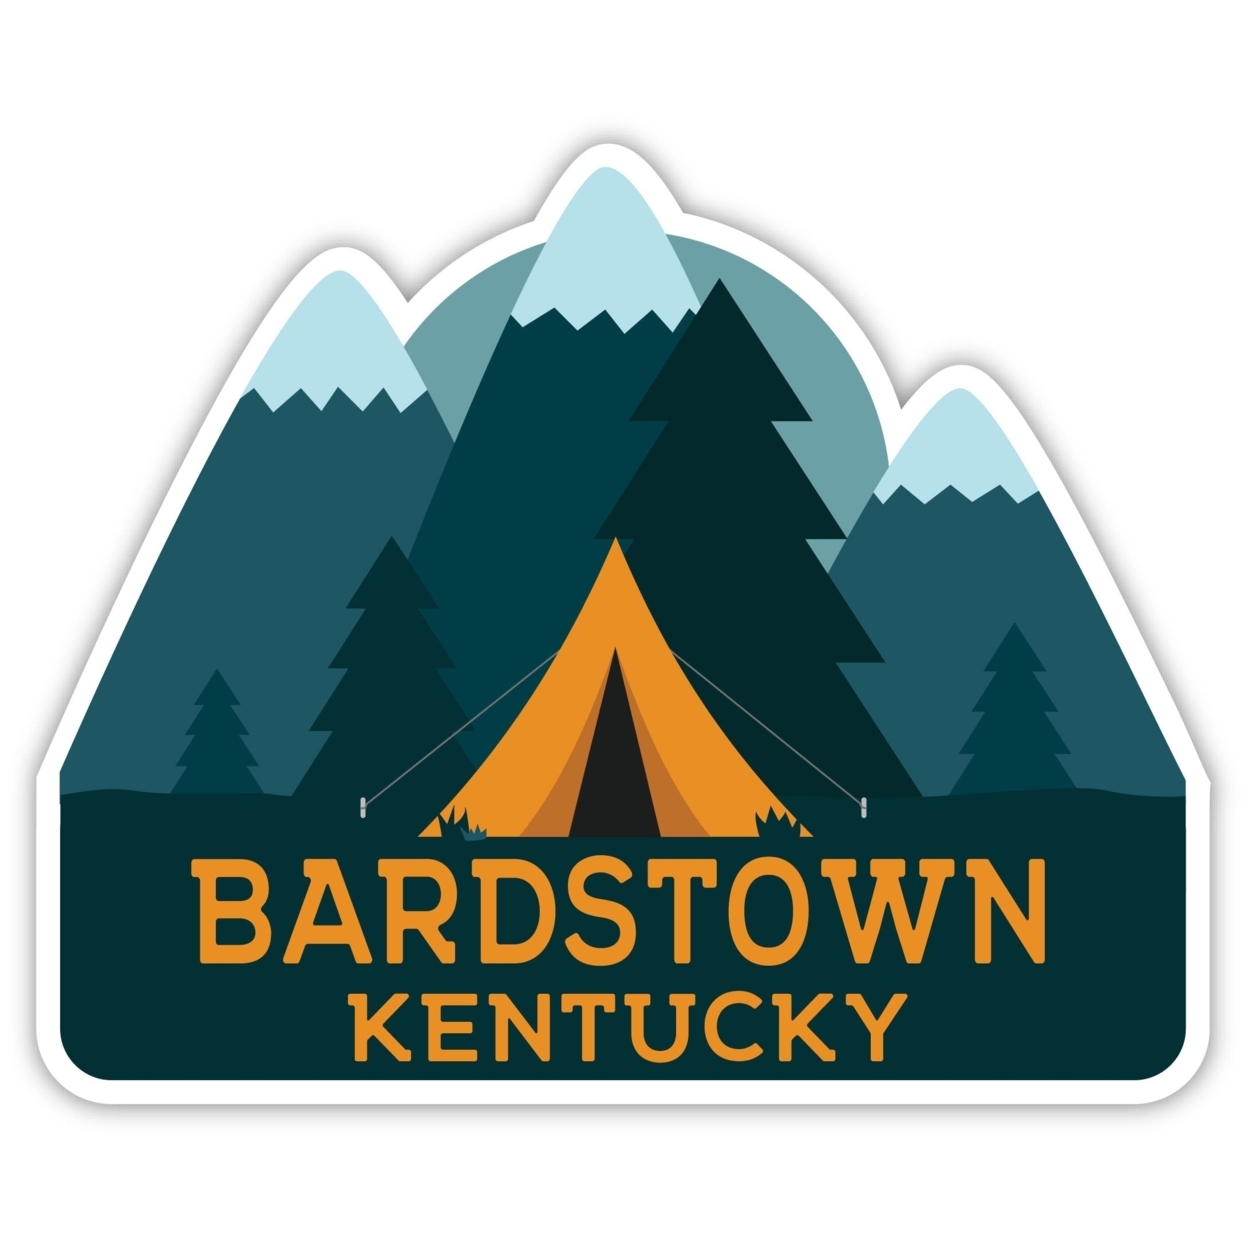 Bardstown Kentucky Souvenir Decorative Stickers (Choose Theme And Size) - 4-Pack, 12-Inch, Tent